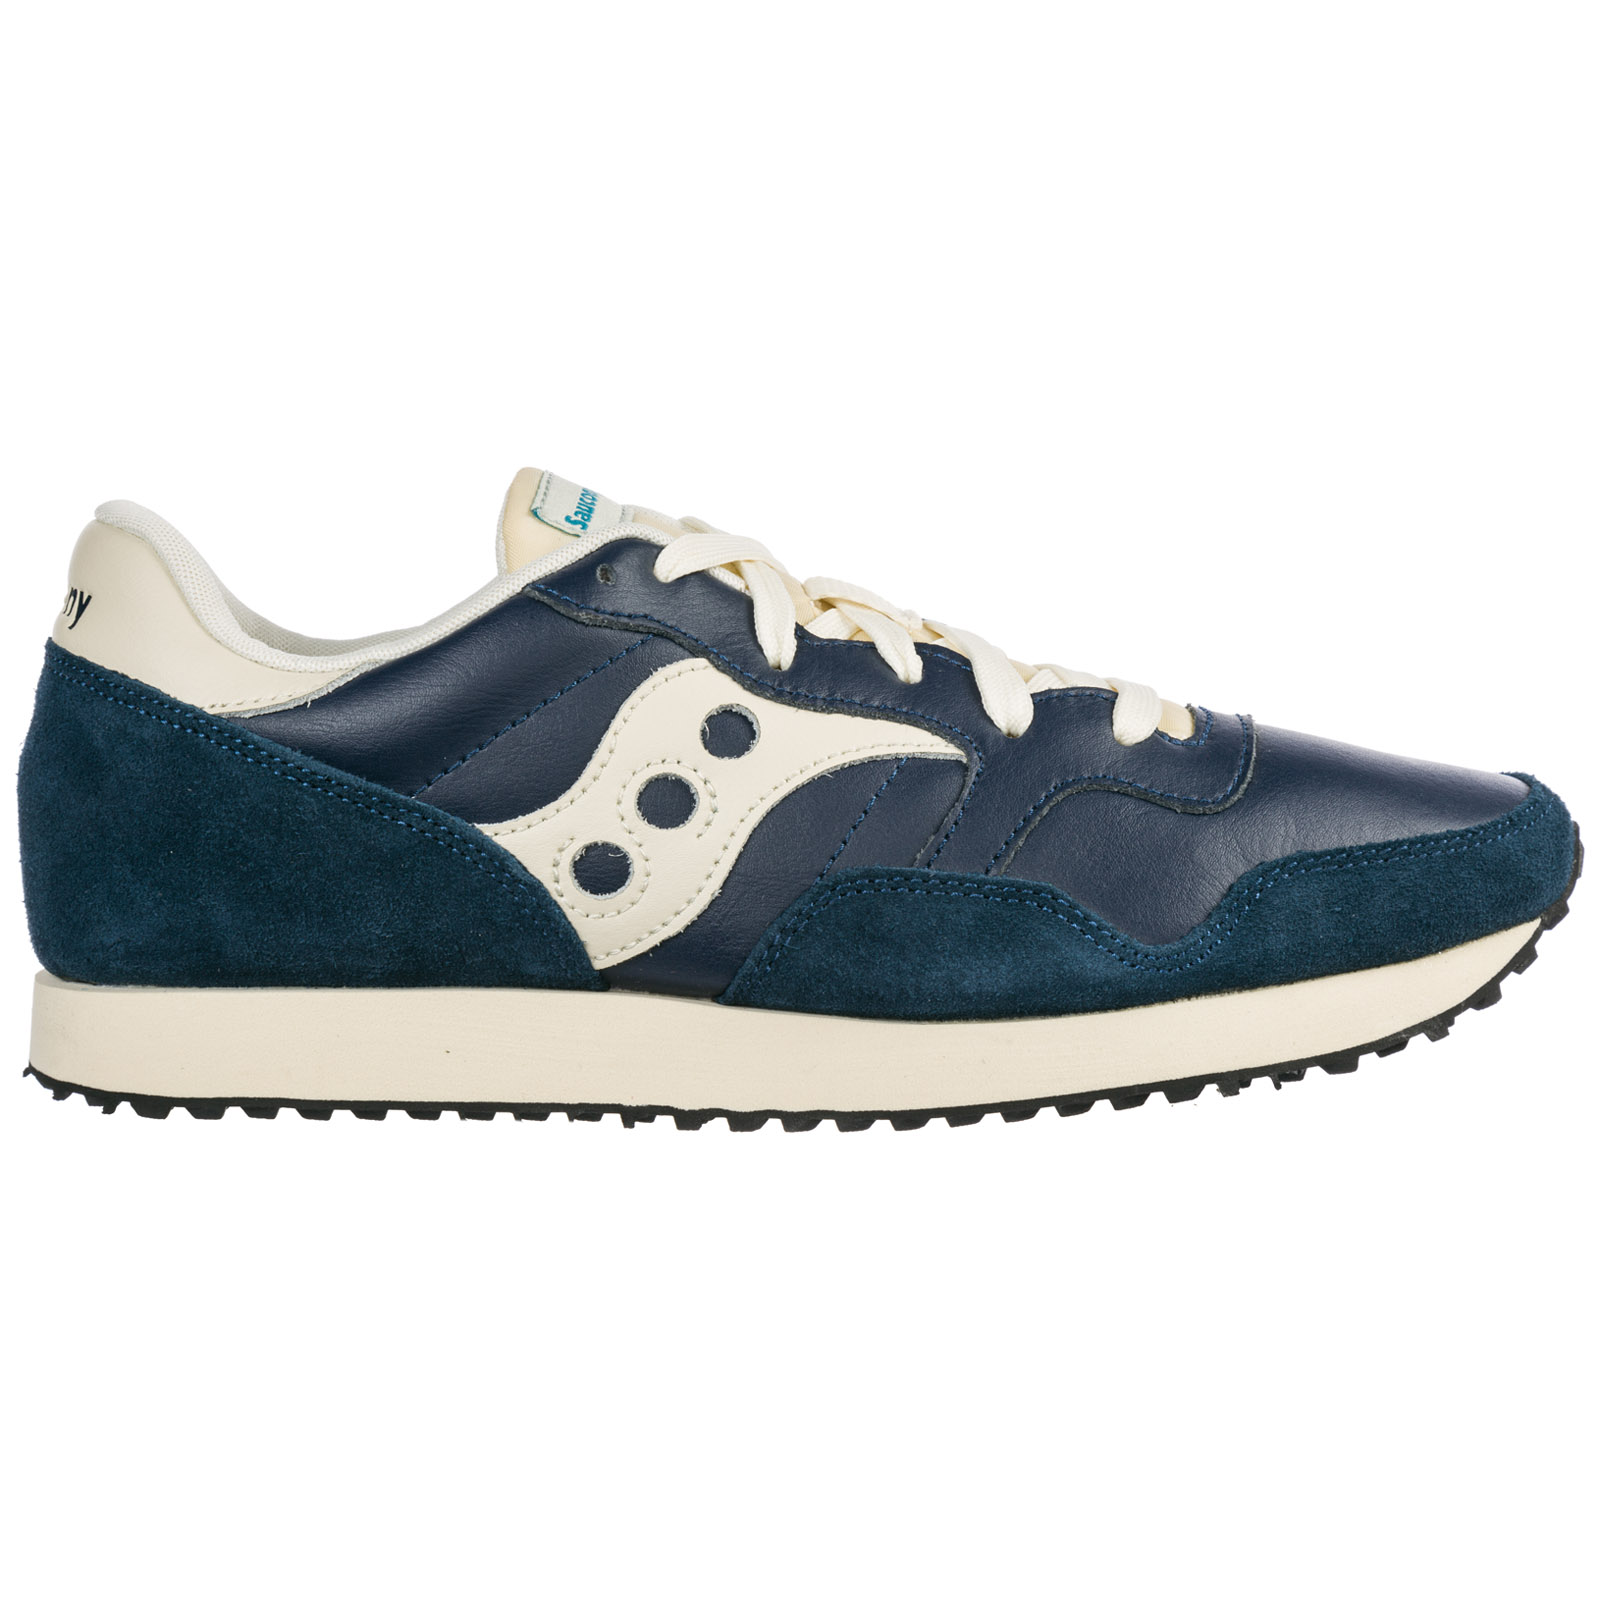 saucony dxn trainer 46 off 58% - www 